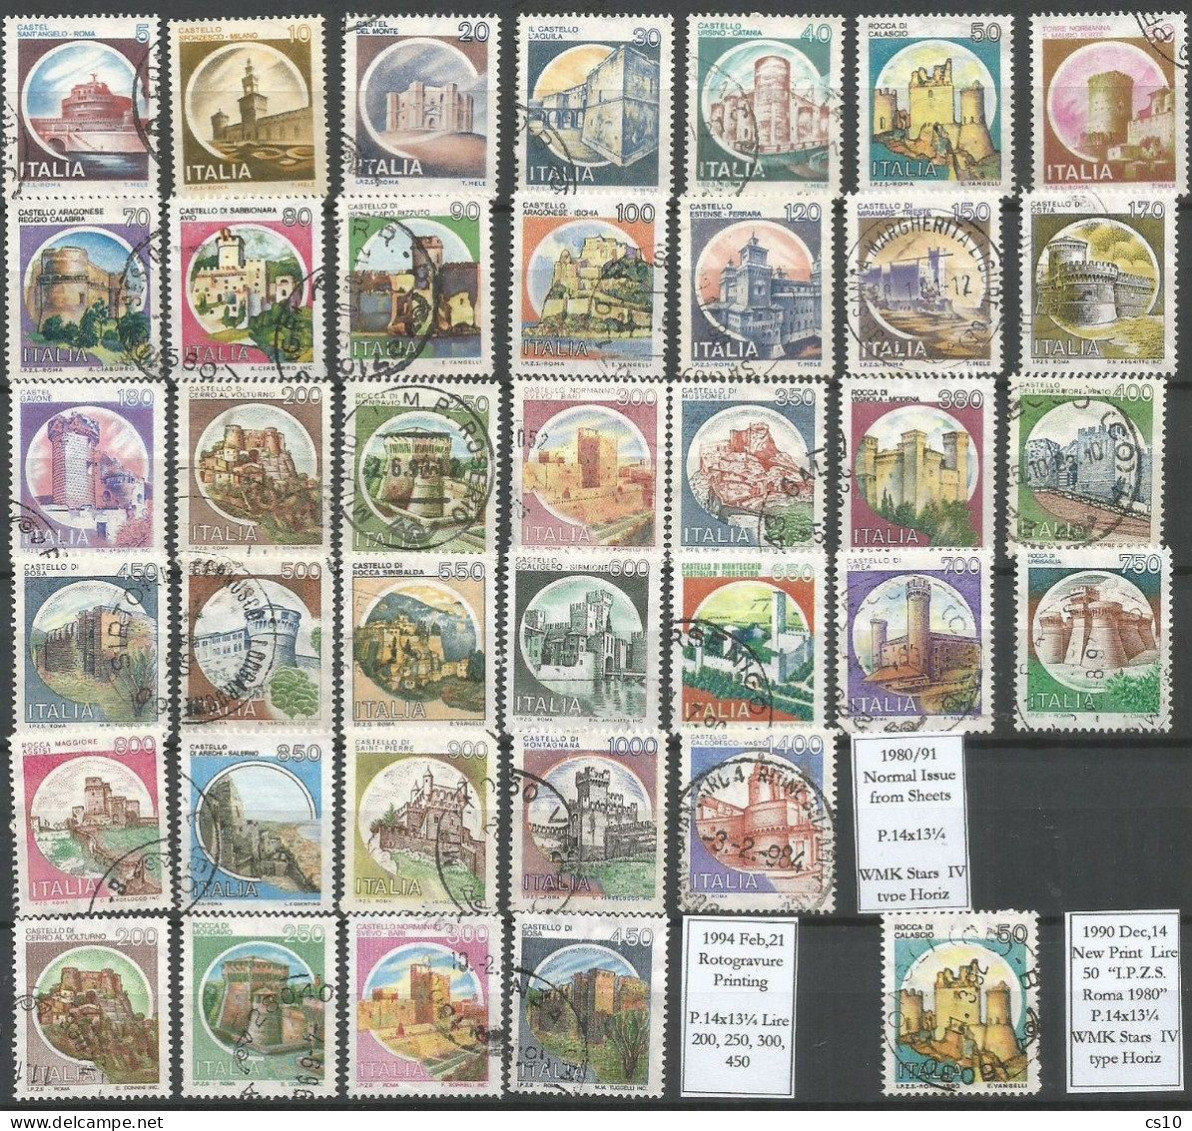 1980/94 Castelli D'Italia Italy Castles Cpl Issue 38v FROM SHEETS Incl. Rotogravure 4v (1994) VFU - Annate Complete